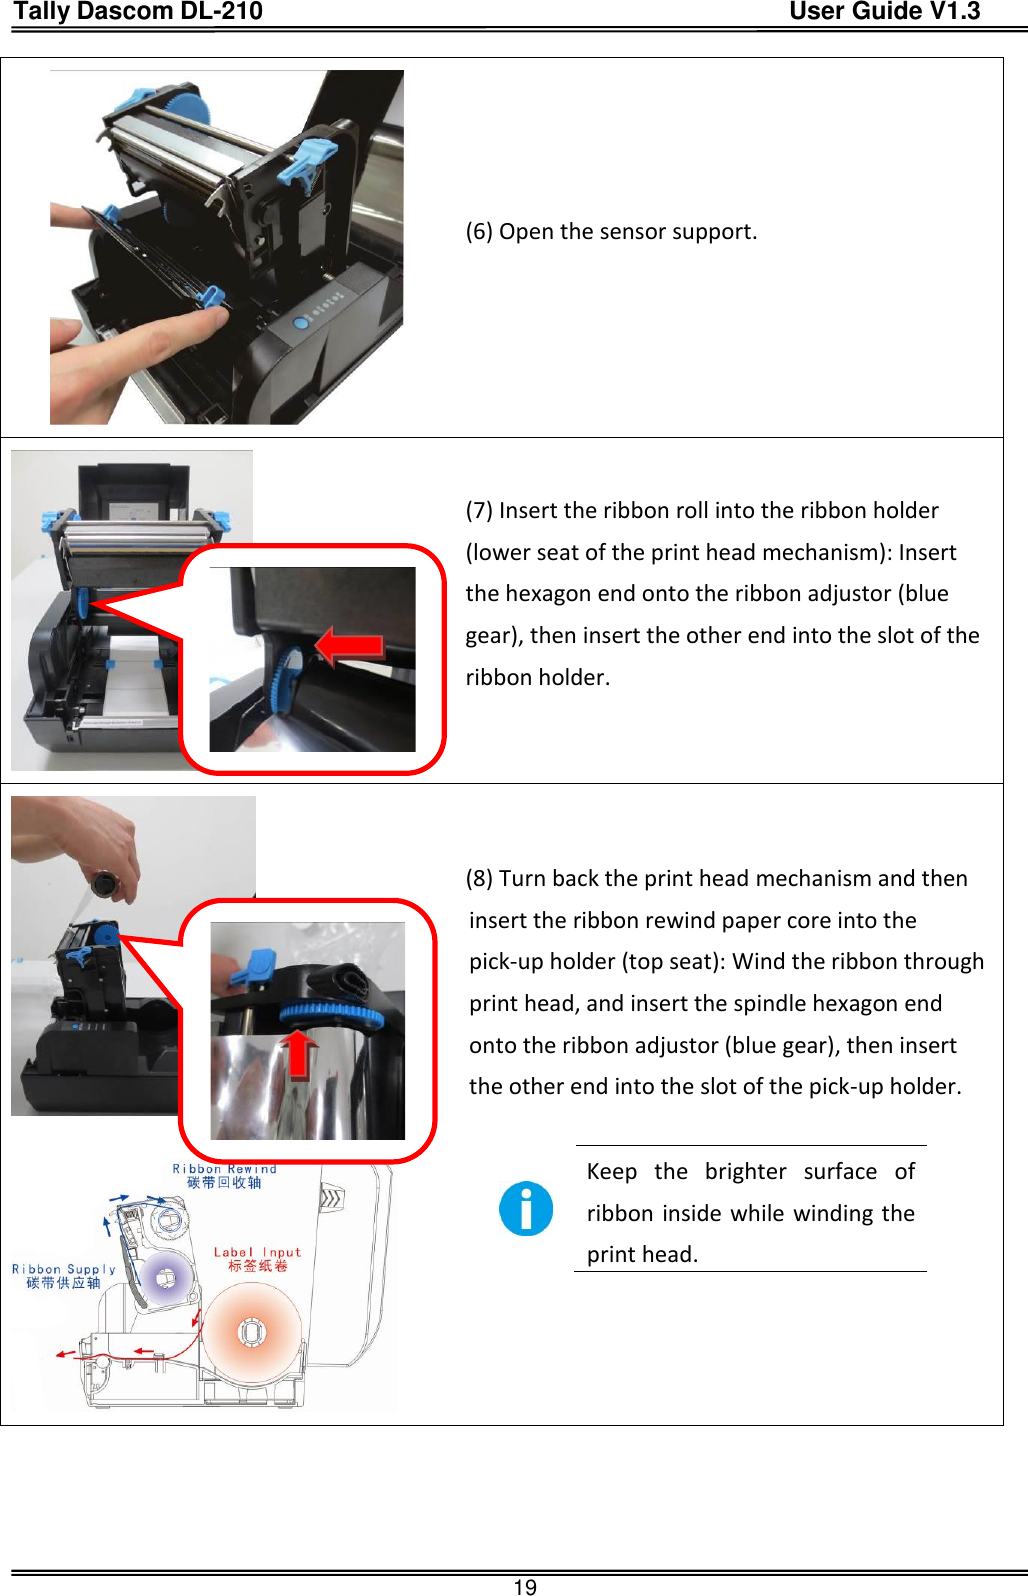 Tally Dascom DL-210                                          User Guide V1.3  19  (6) Open the sensor support.   (7) Insert the ribbon roll into the ribbon holder (lower seat of the print head mechanism): Insert the hexagon end onto the ribbon adjustor (blue gear), then insert the other end into the slot of the ribbon holder.      (8) Turn back the print head mechanism and then insert the ribbon rewind paper core into the pick-up holder (top seat): Wind the ribbon through print head, and insert the spindle hexagon end onto the ribbon adjustor (blue gear), then insert the other end into the slot of the pick-up holder.   Keep  the  brighter  surface  of ribbon inside while winding the print head.     